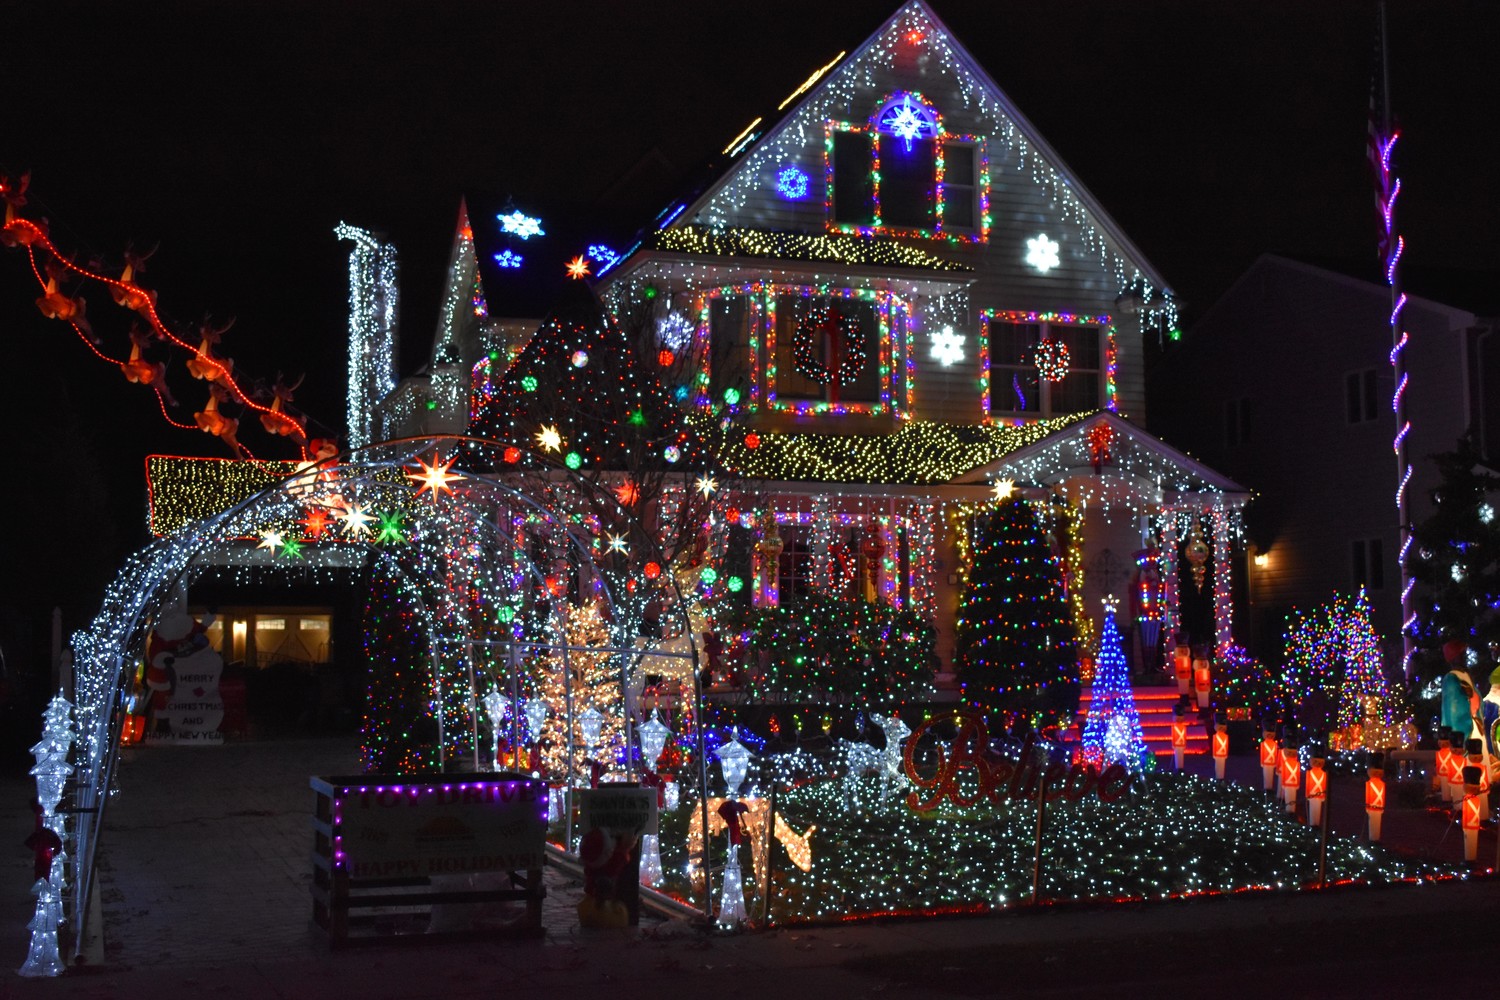 Over the span of more than a month, Rich McQuillan and his family transformed their Cedar Avenue home into a holiday spectacle, with a display that includes nearly 300,000 lights.